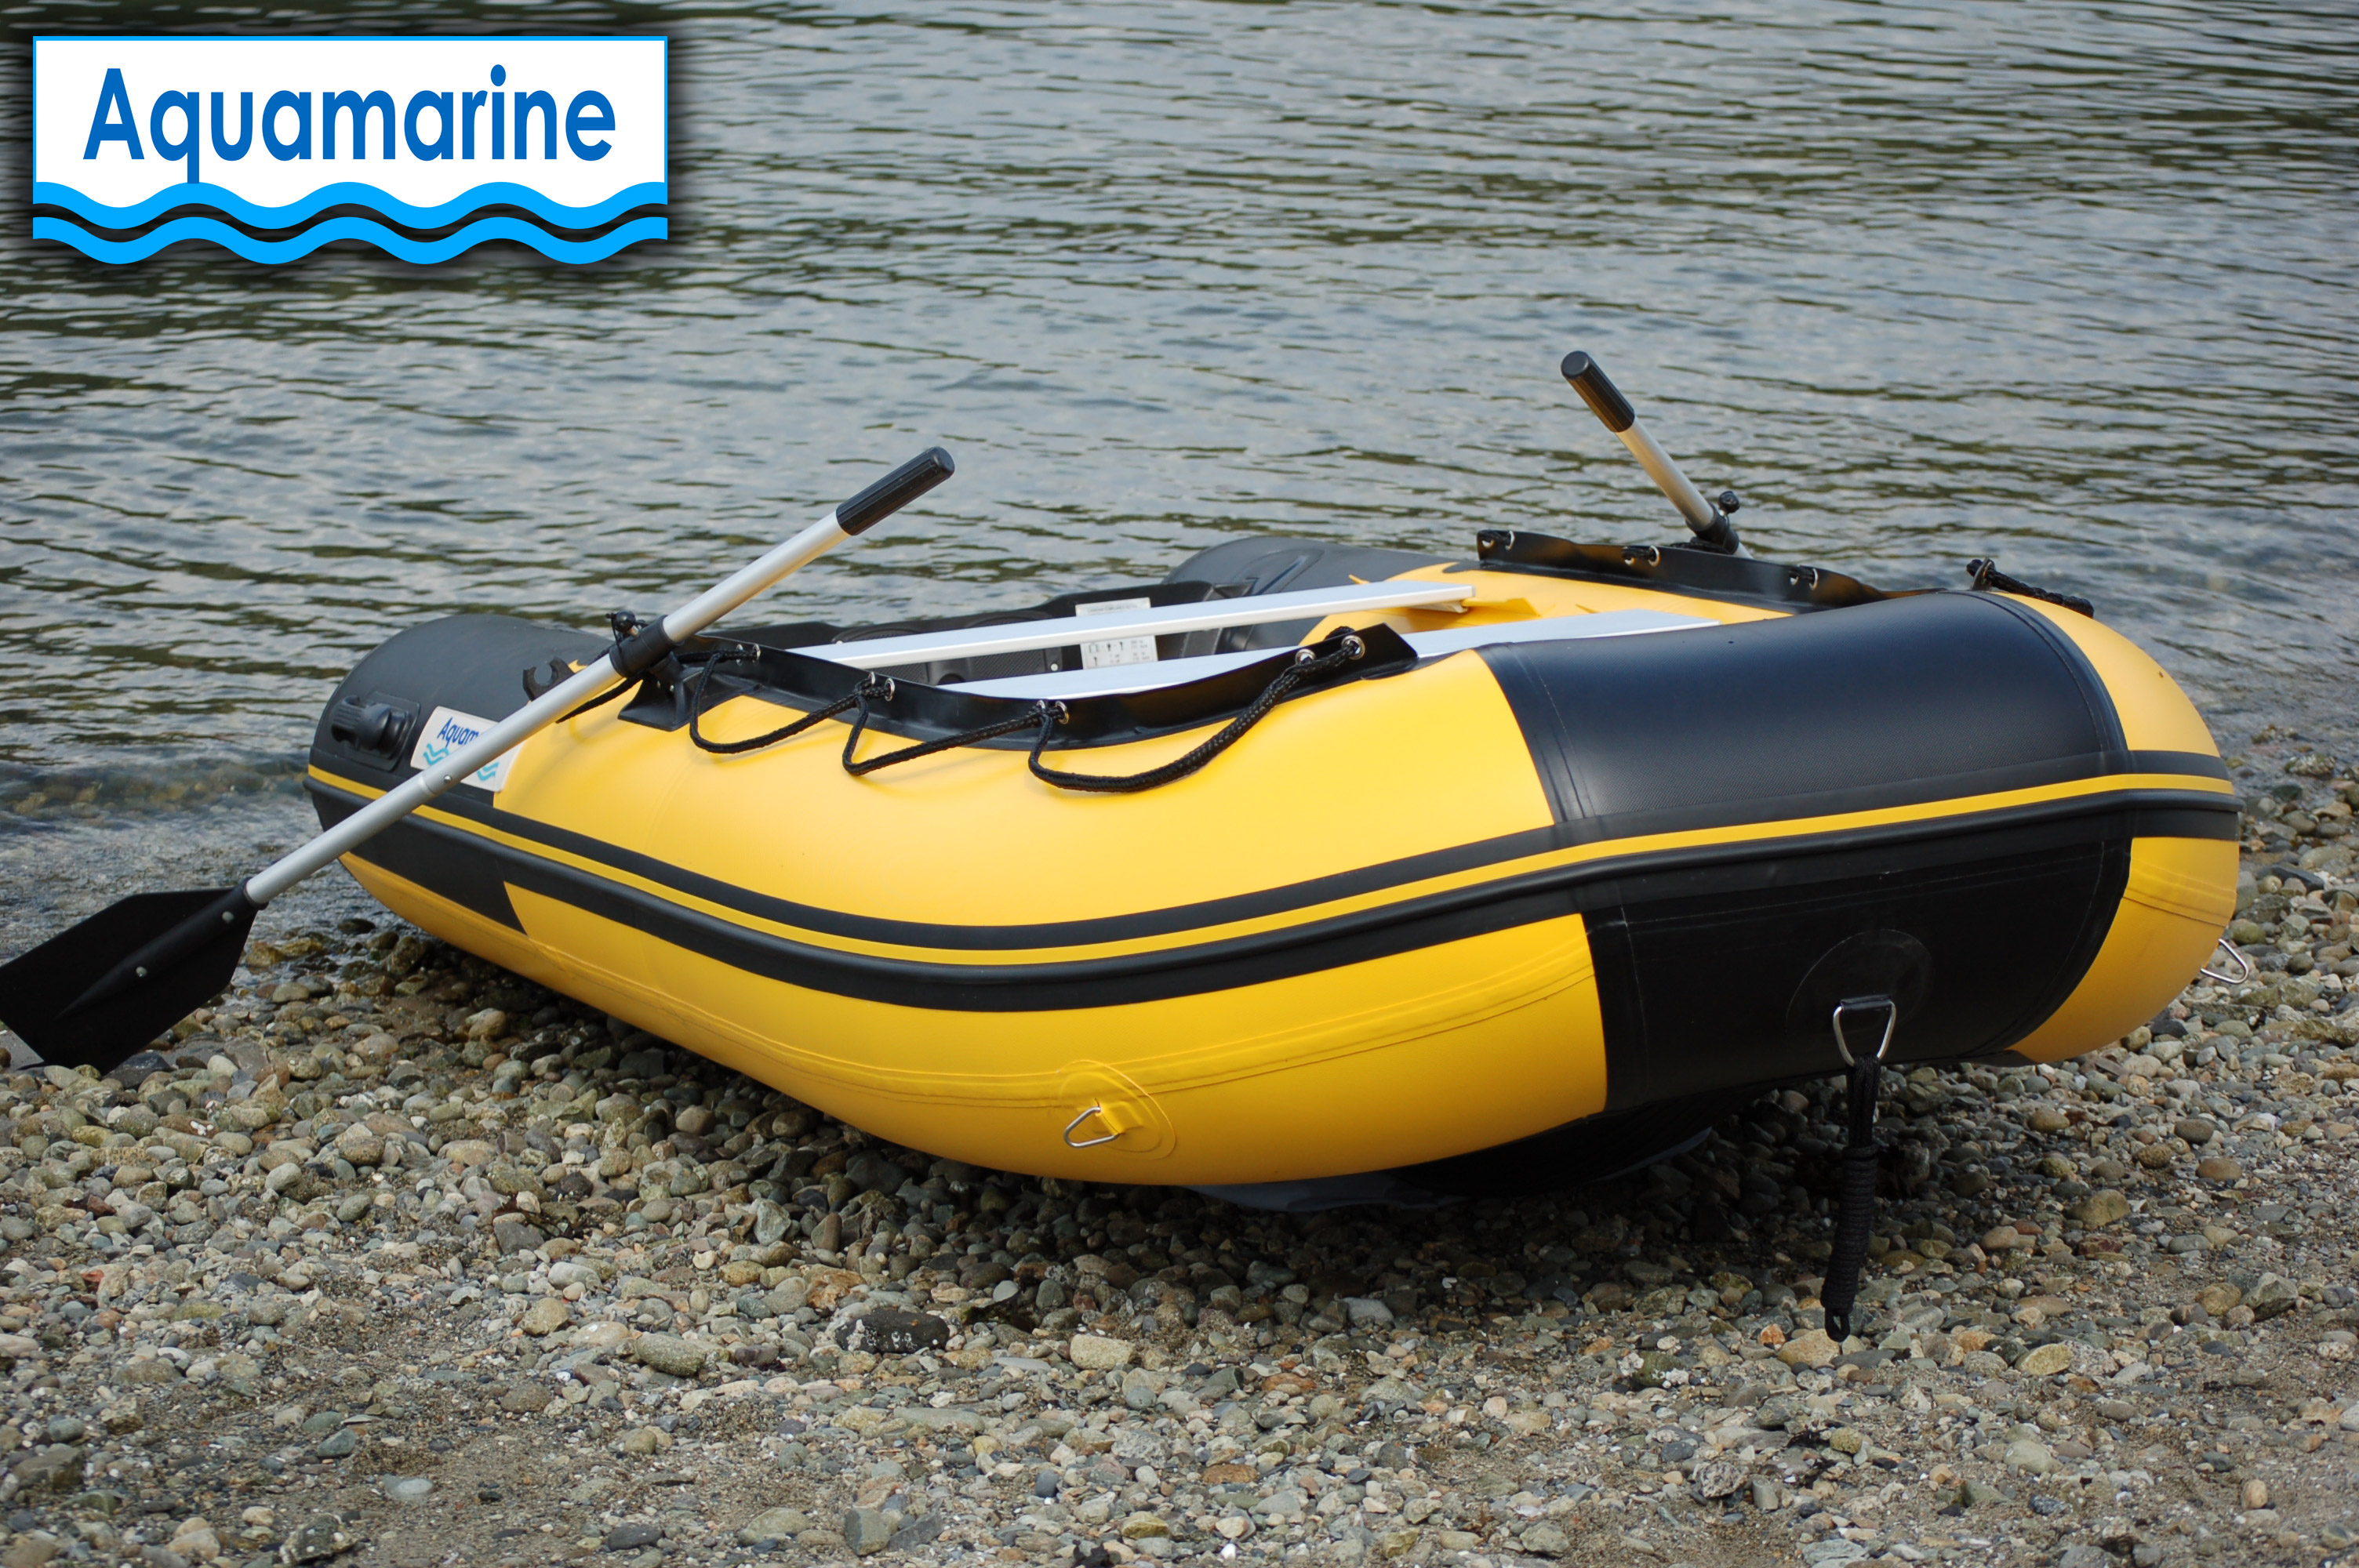 Related Products 12 ' INFLATABLE BOAT SPORT -12.5 ' INFLATABLE BOAT PRO 